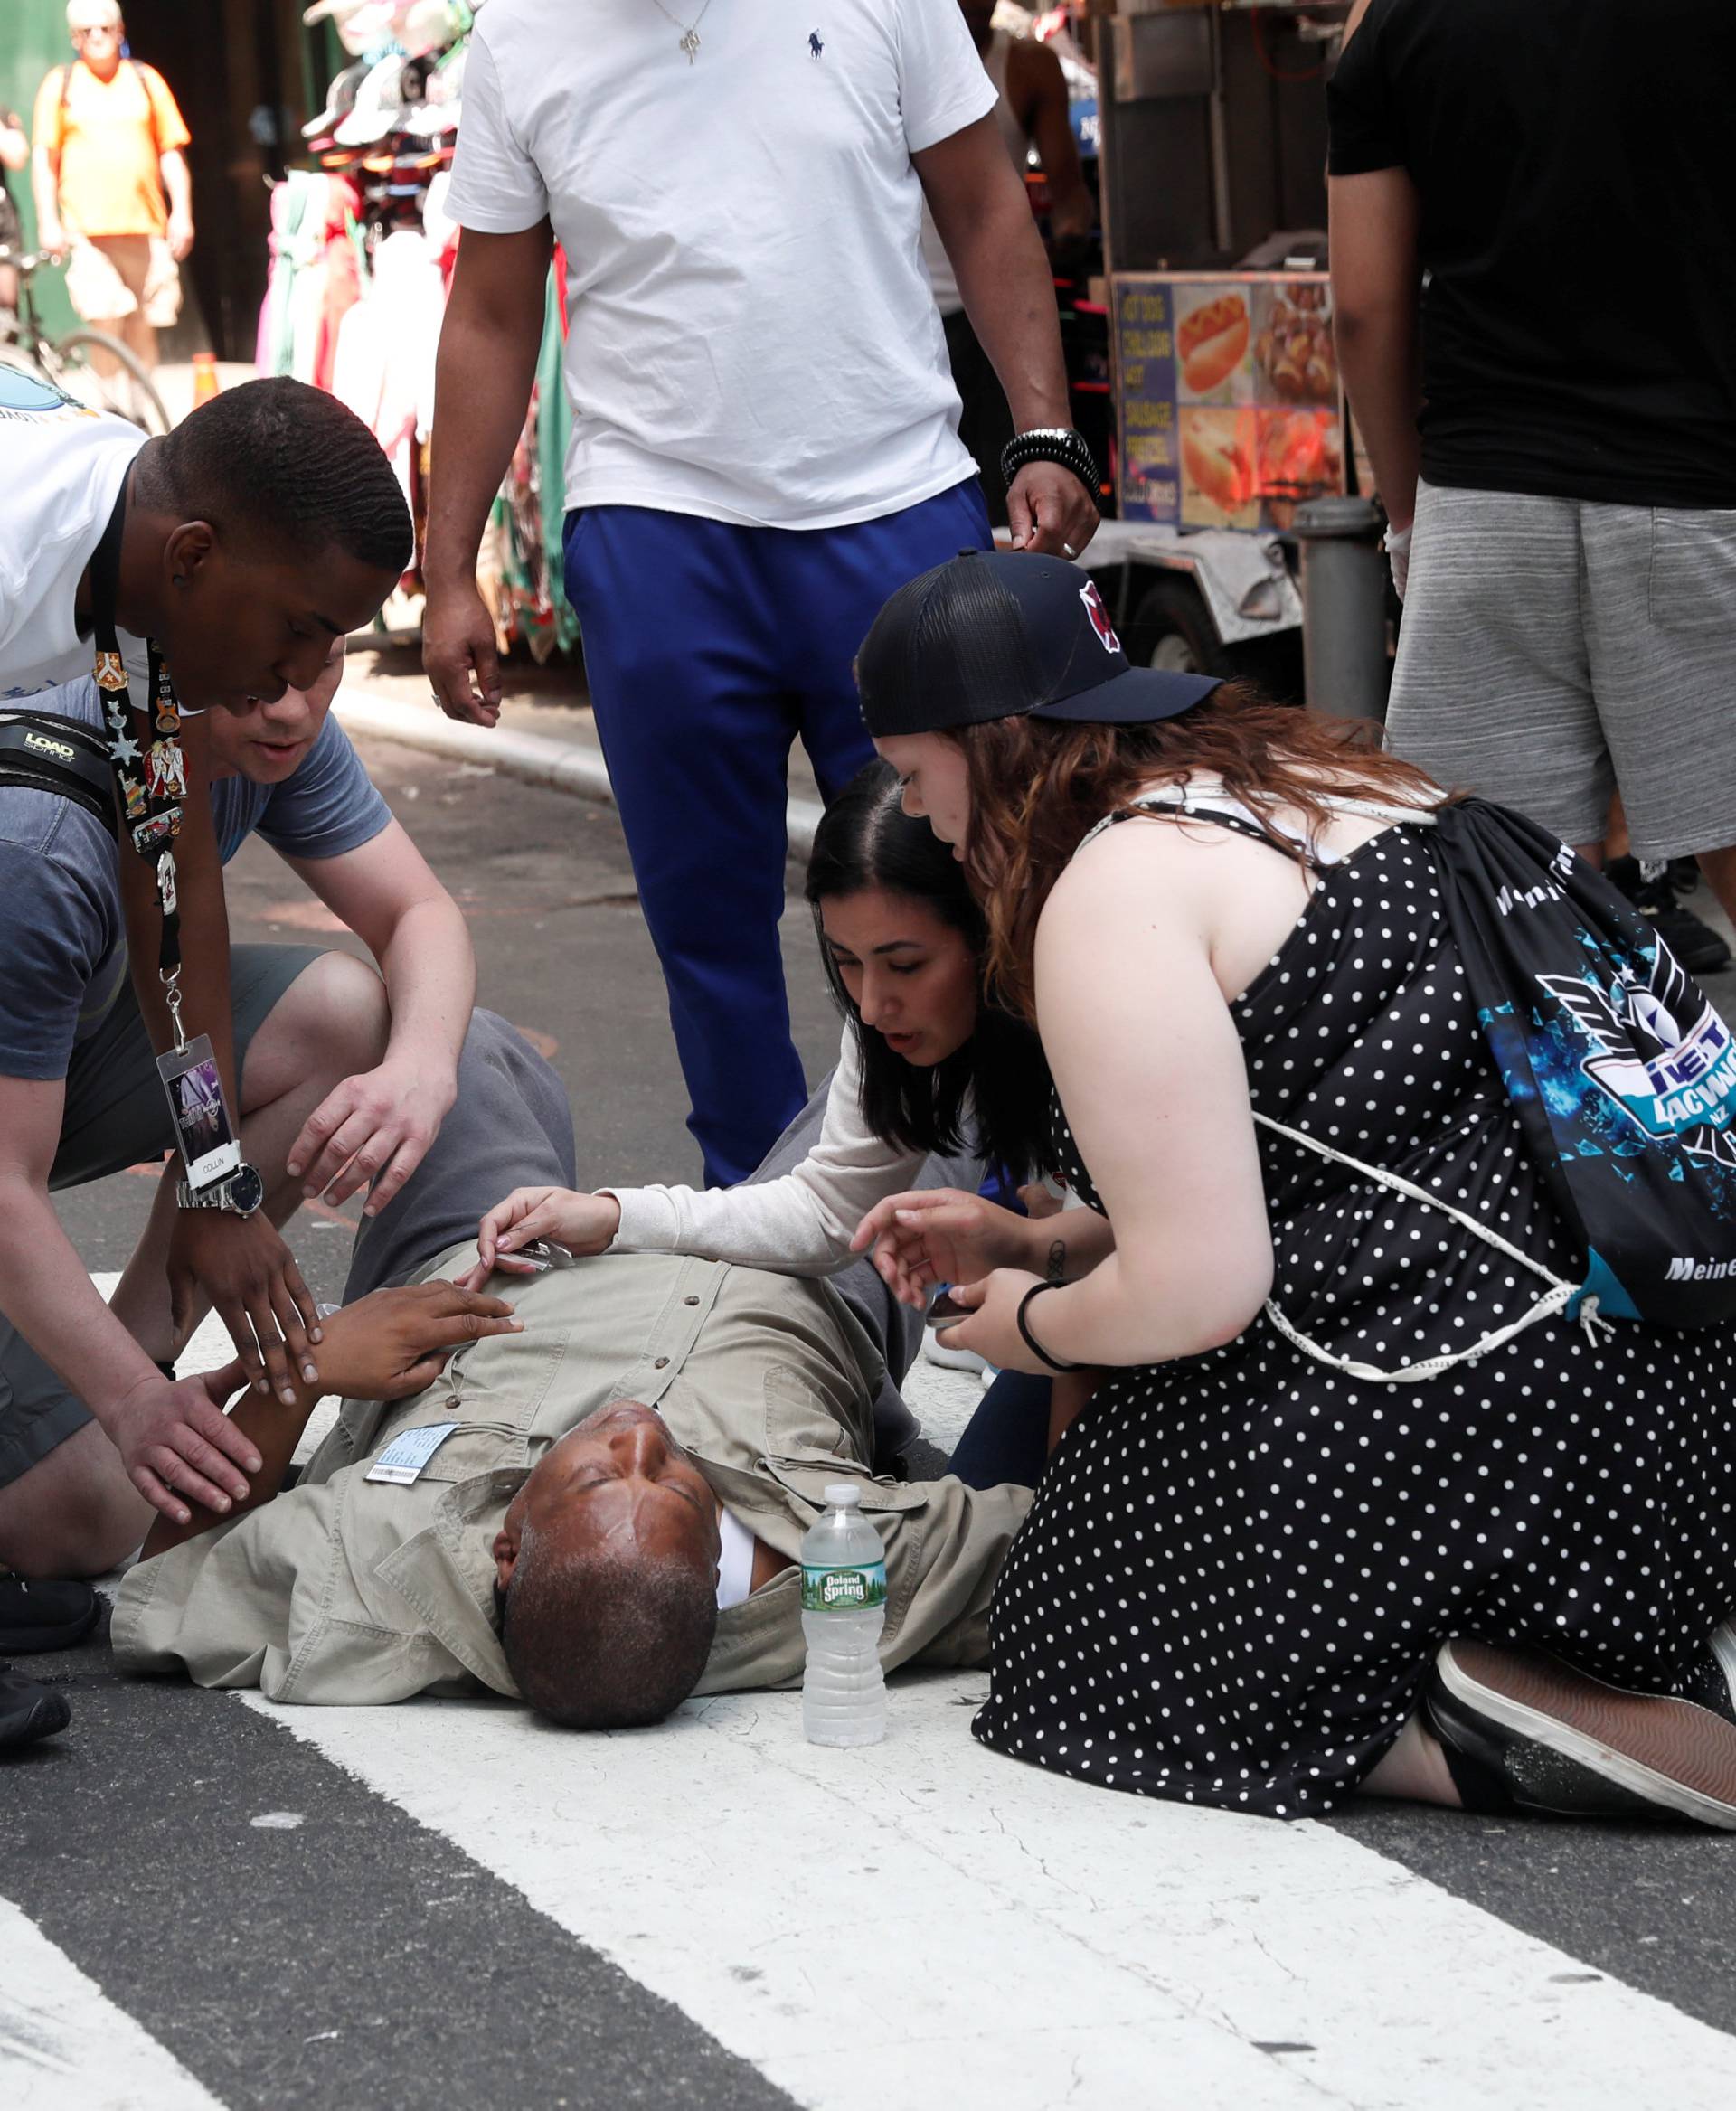 An injured man is seen on the sidewalk in Times Square after a speeding vehicle struck pedestrians on the sidewalk in New York City